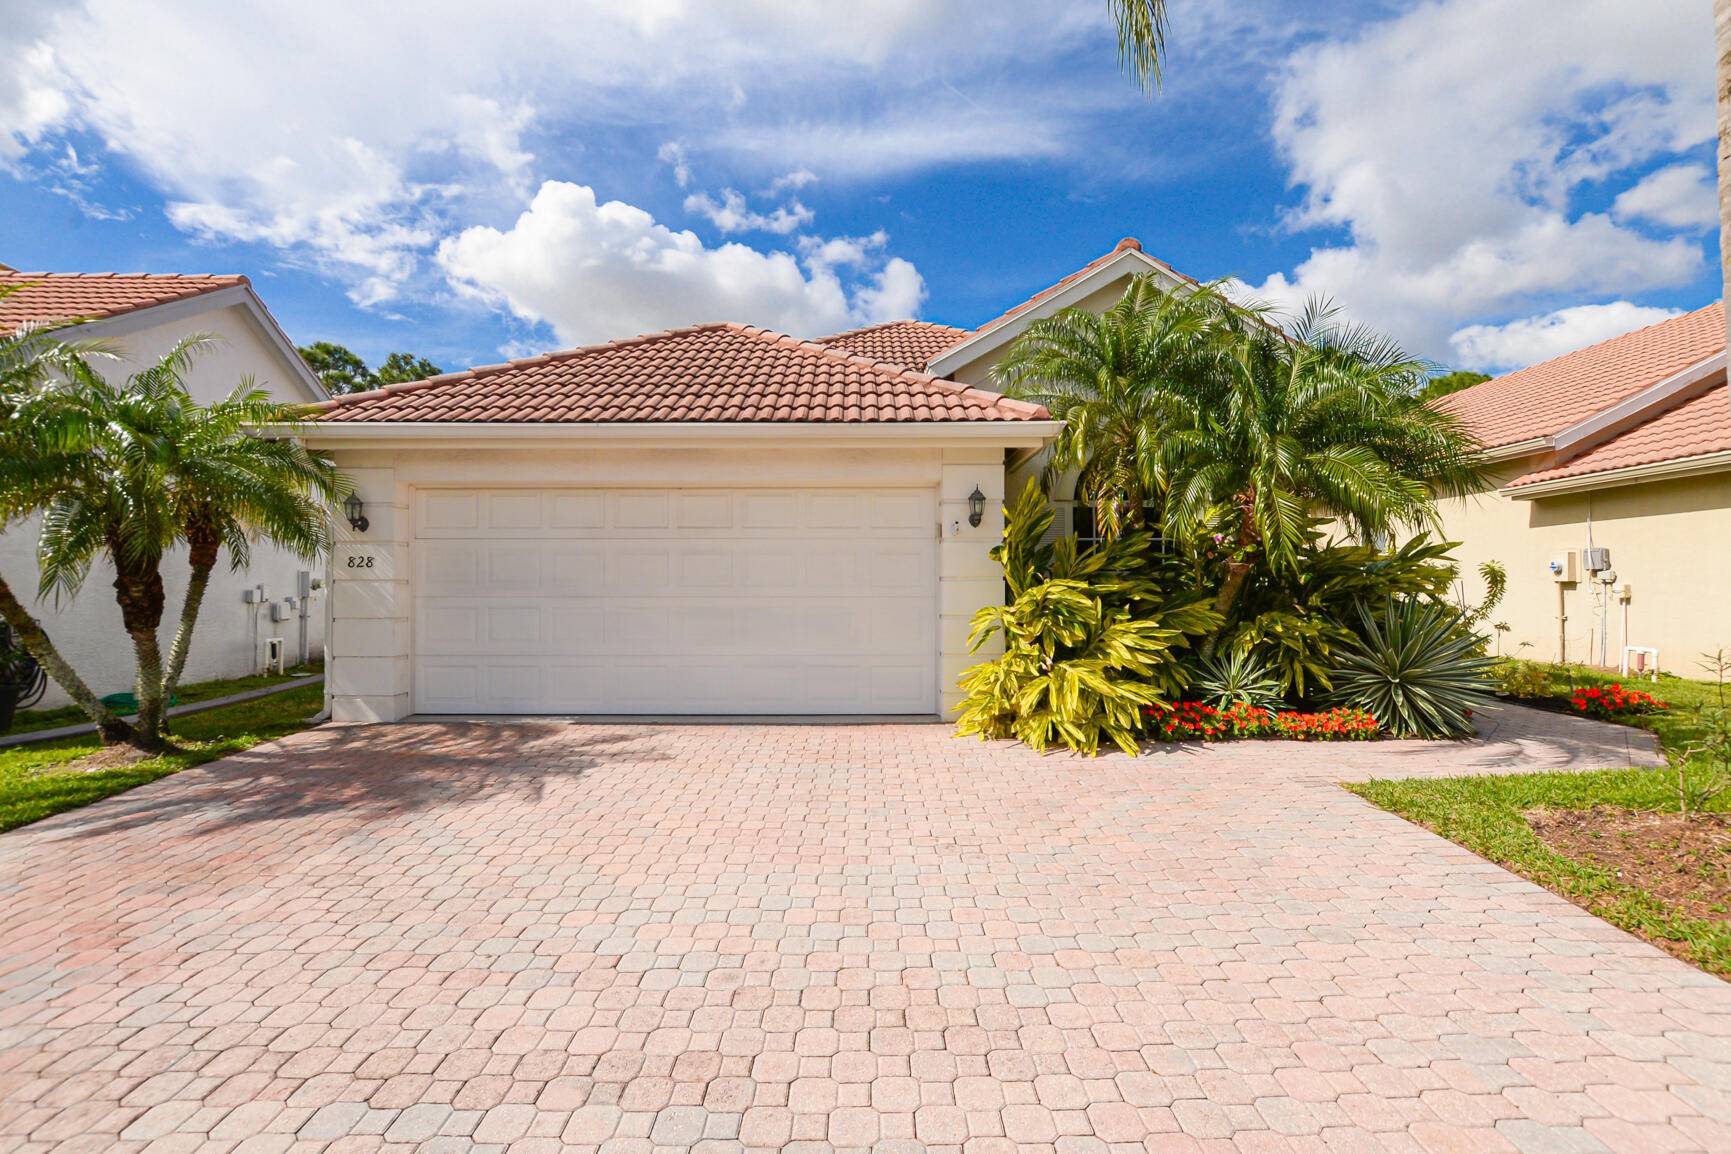 Pride of Ownership shows in this Immaculate Pool home in Lake Charles in the heart of St Lucie West.